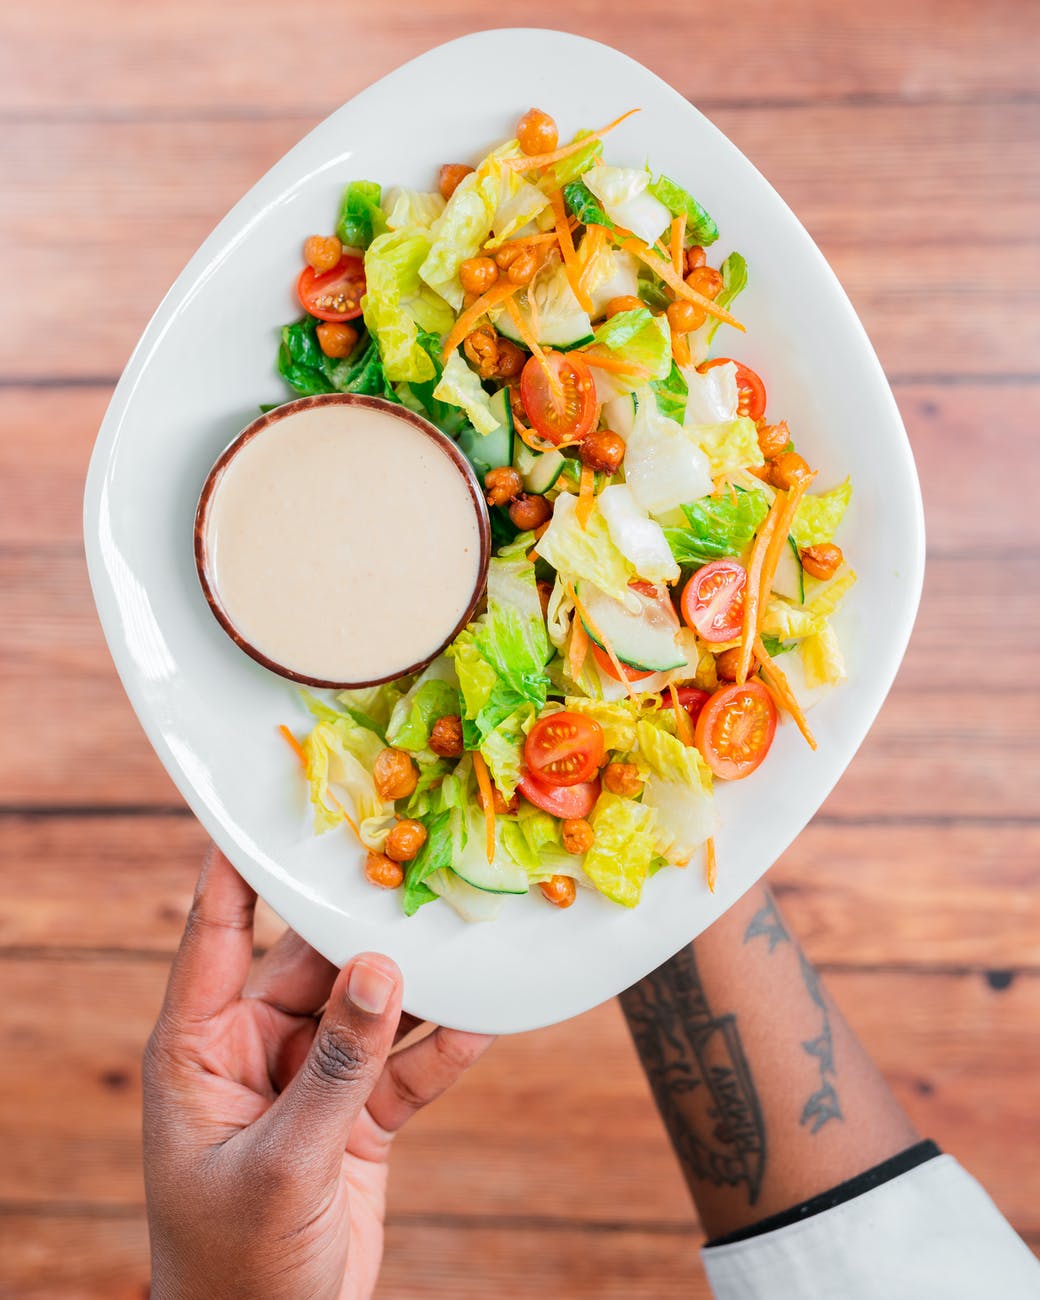 hands holding plate with salad and dressing